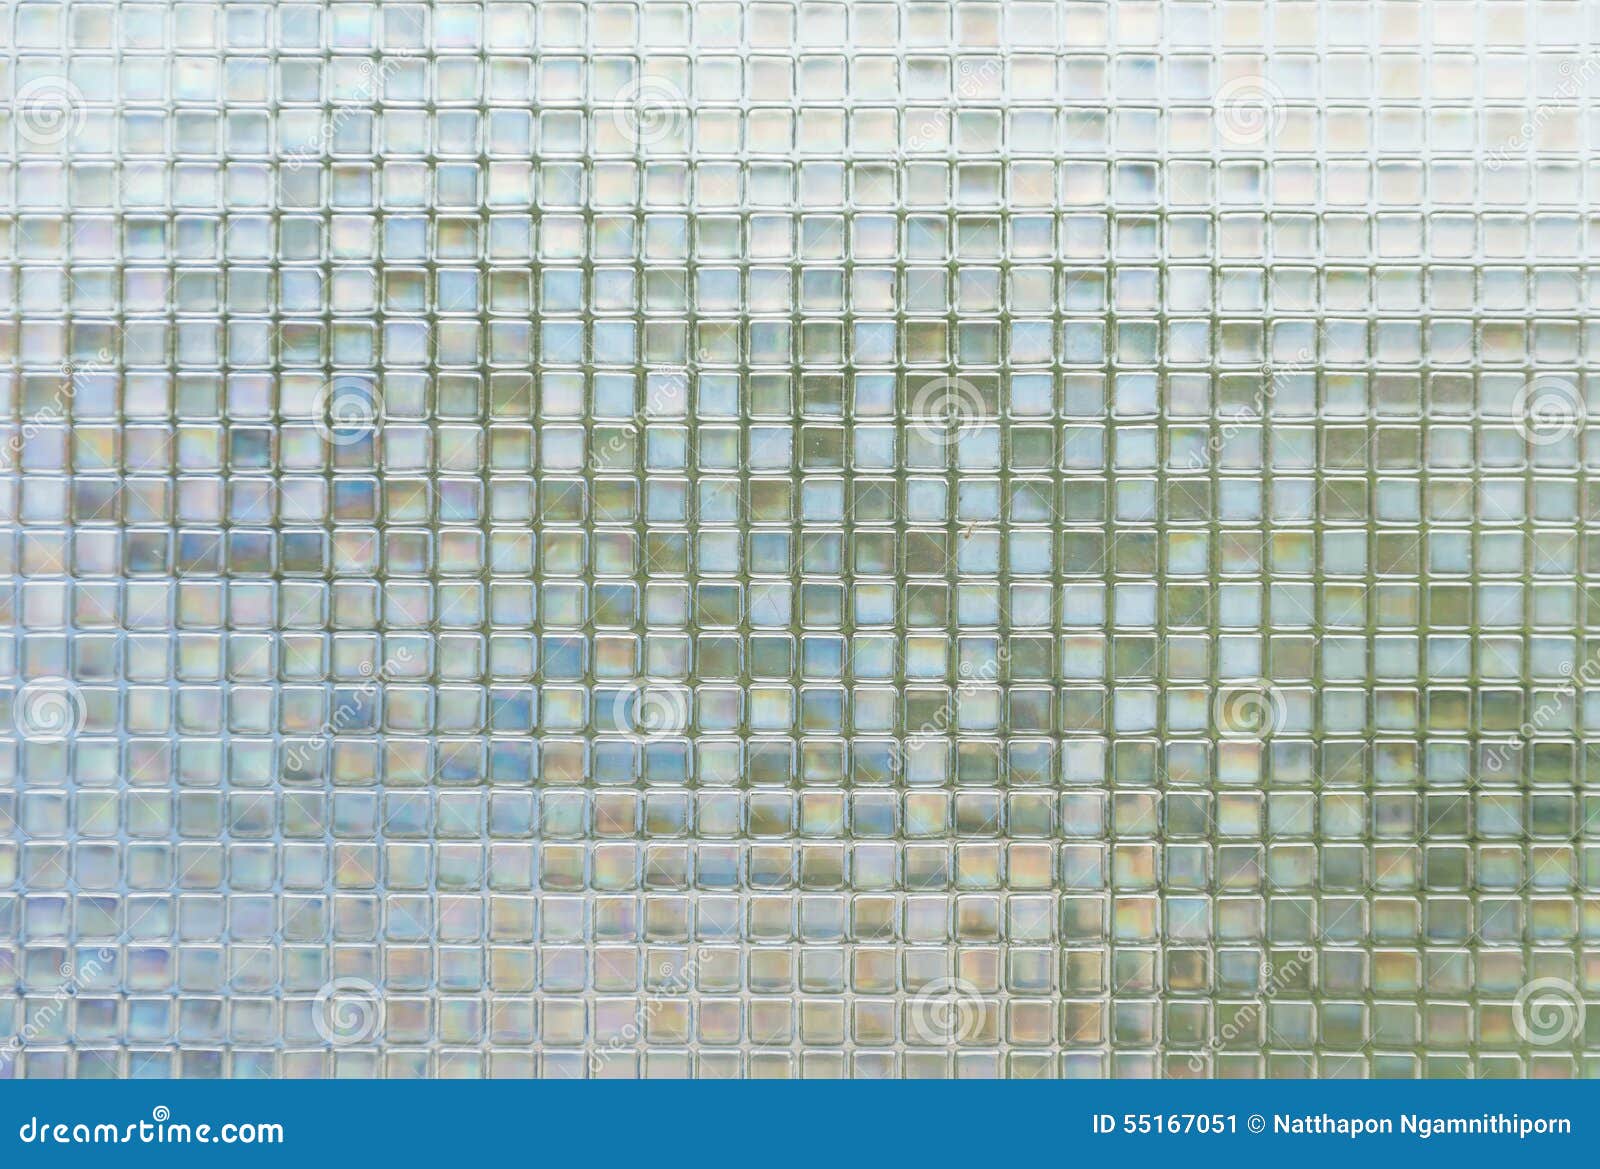 Seamless Blue Glass Tiles Texture Background Stock Image - Image: 55167051